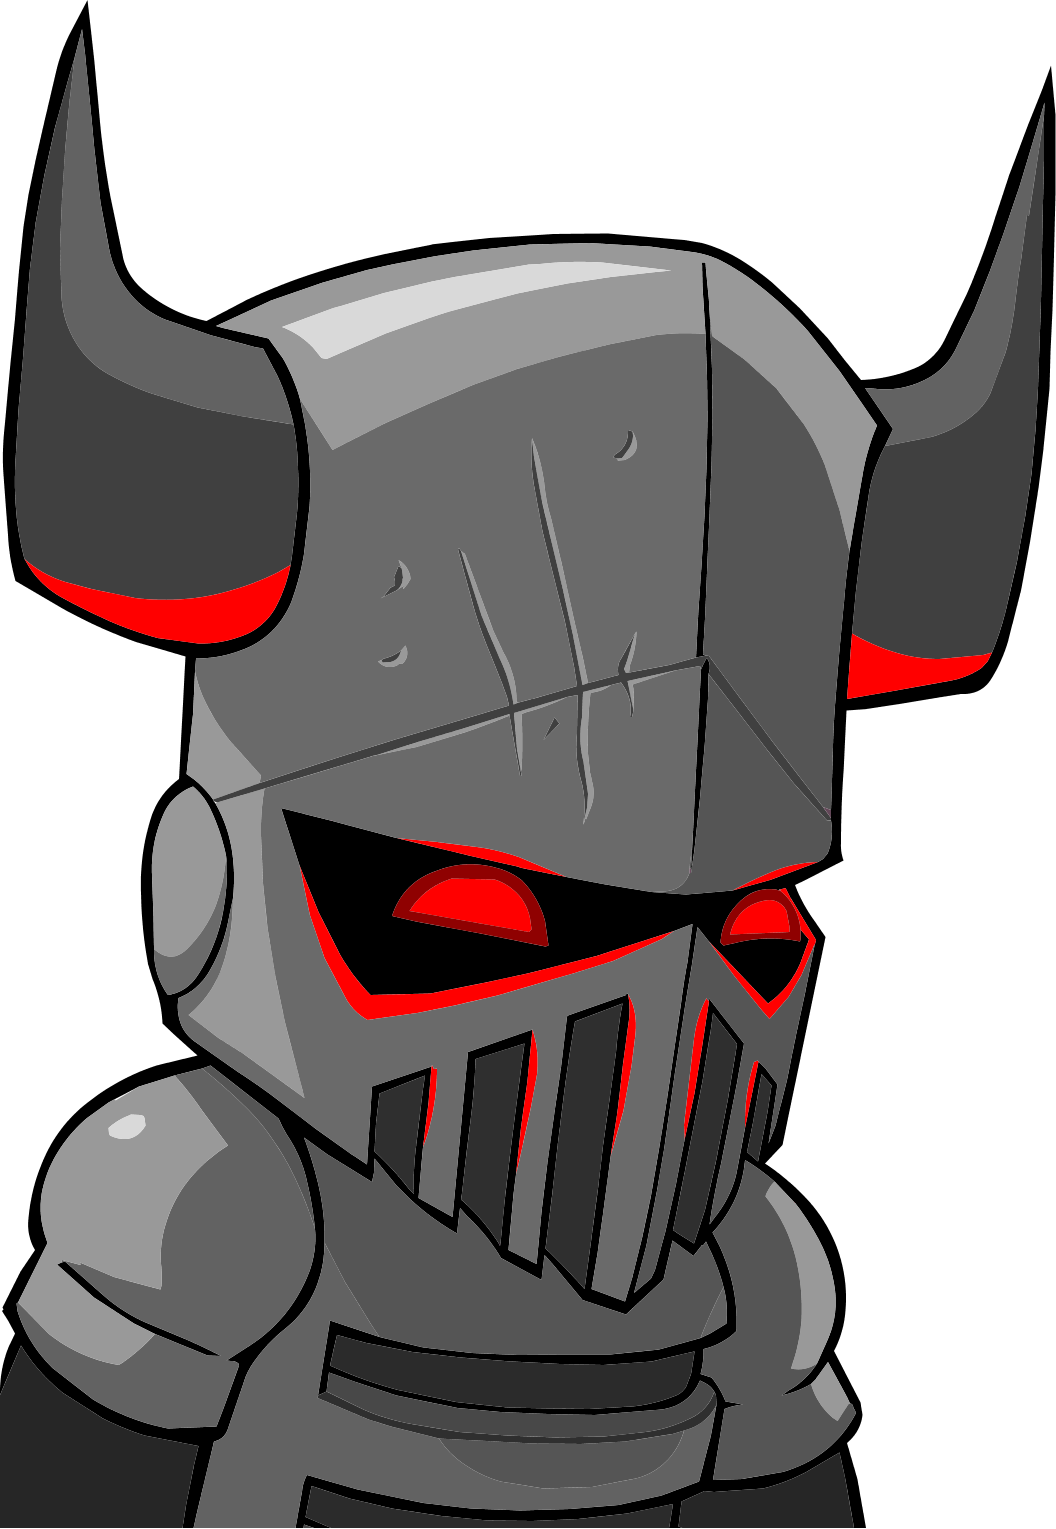 castle-crashers-icon-at-vectorified-collection-of-castle-crashers